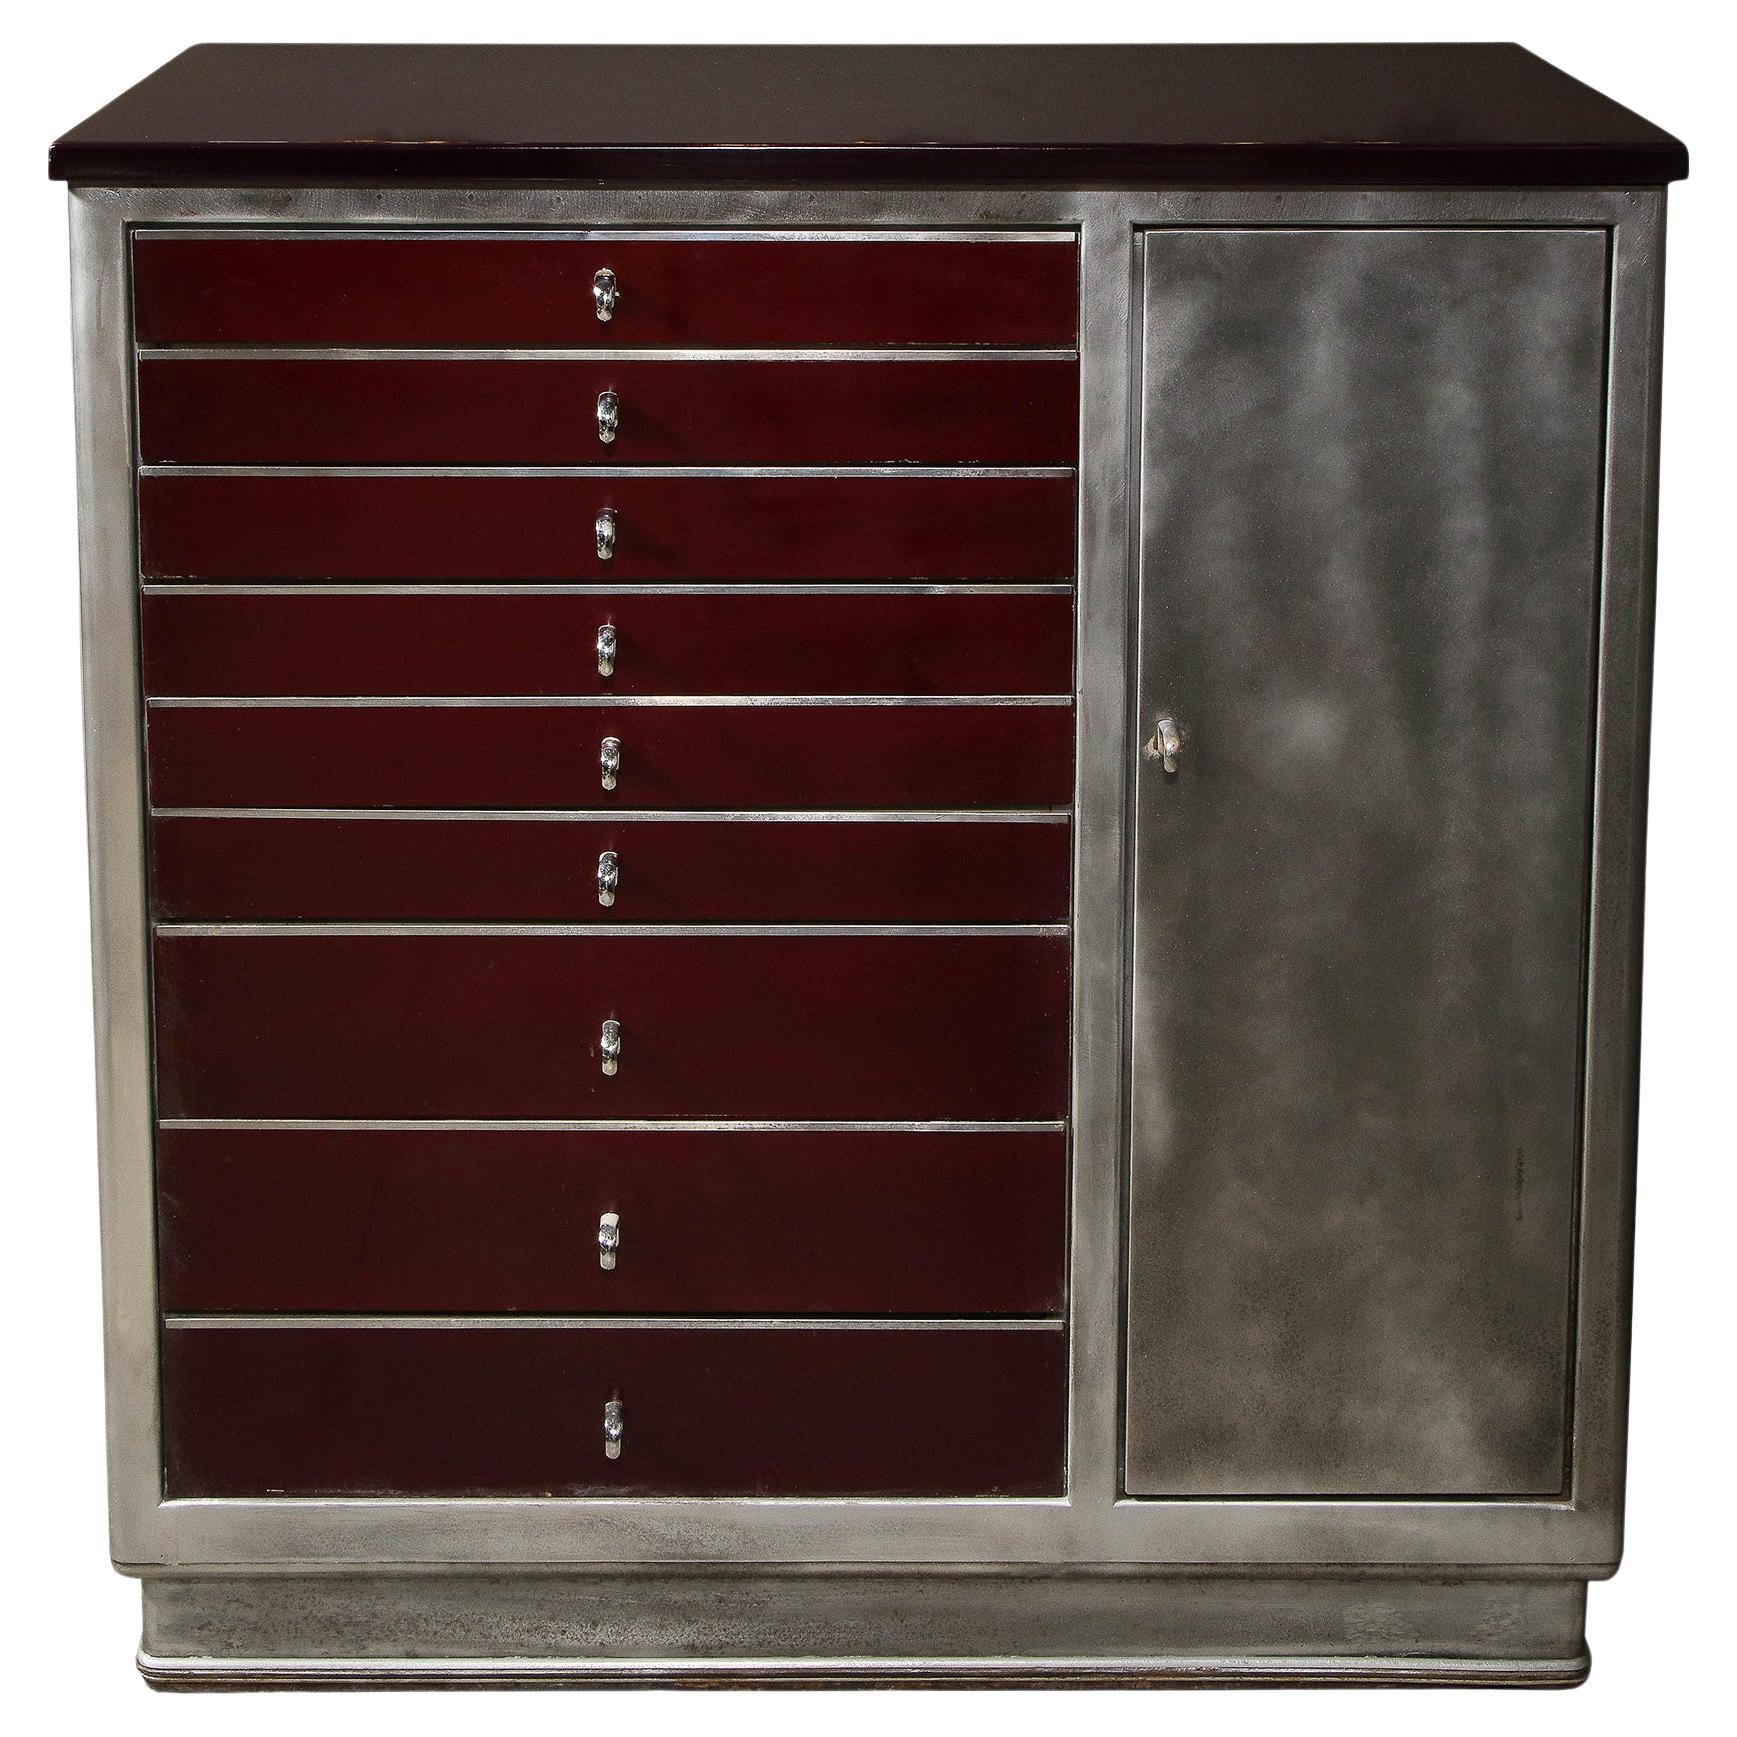 Brushed Steel and Enameled Cabinet